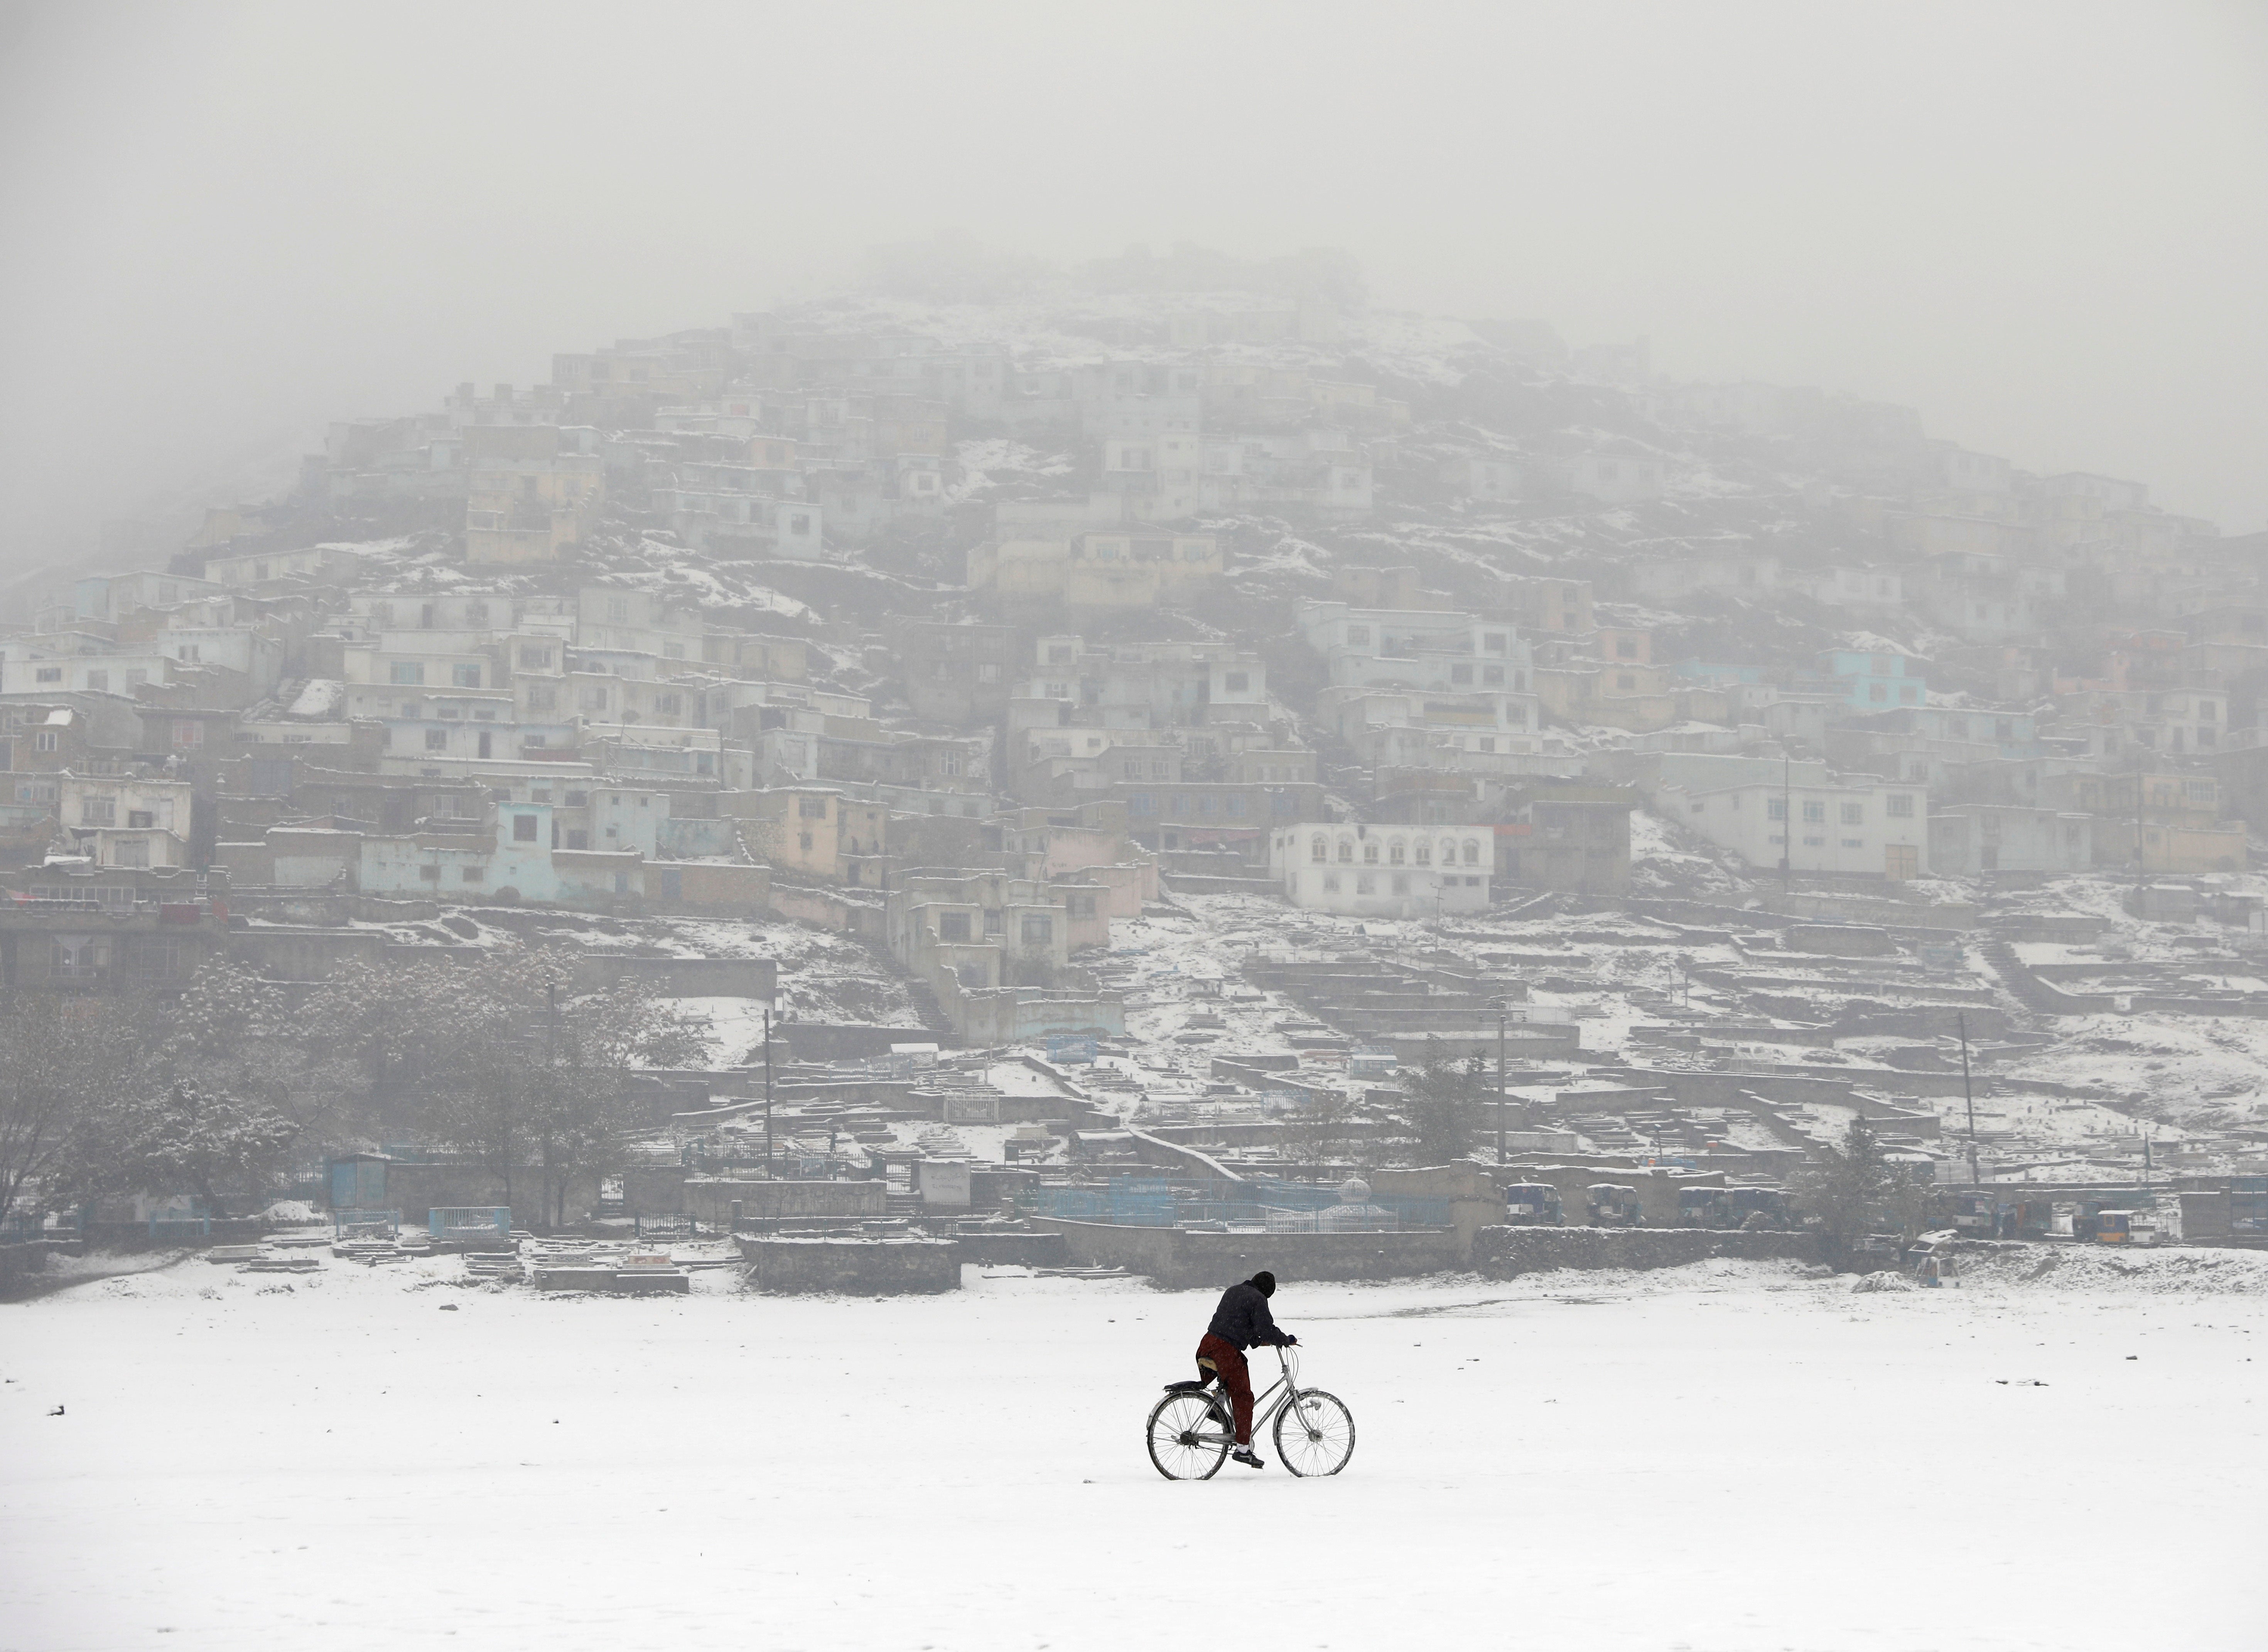 A wintry Kabul (REUTERS/Mohammad Ismail)